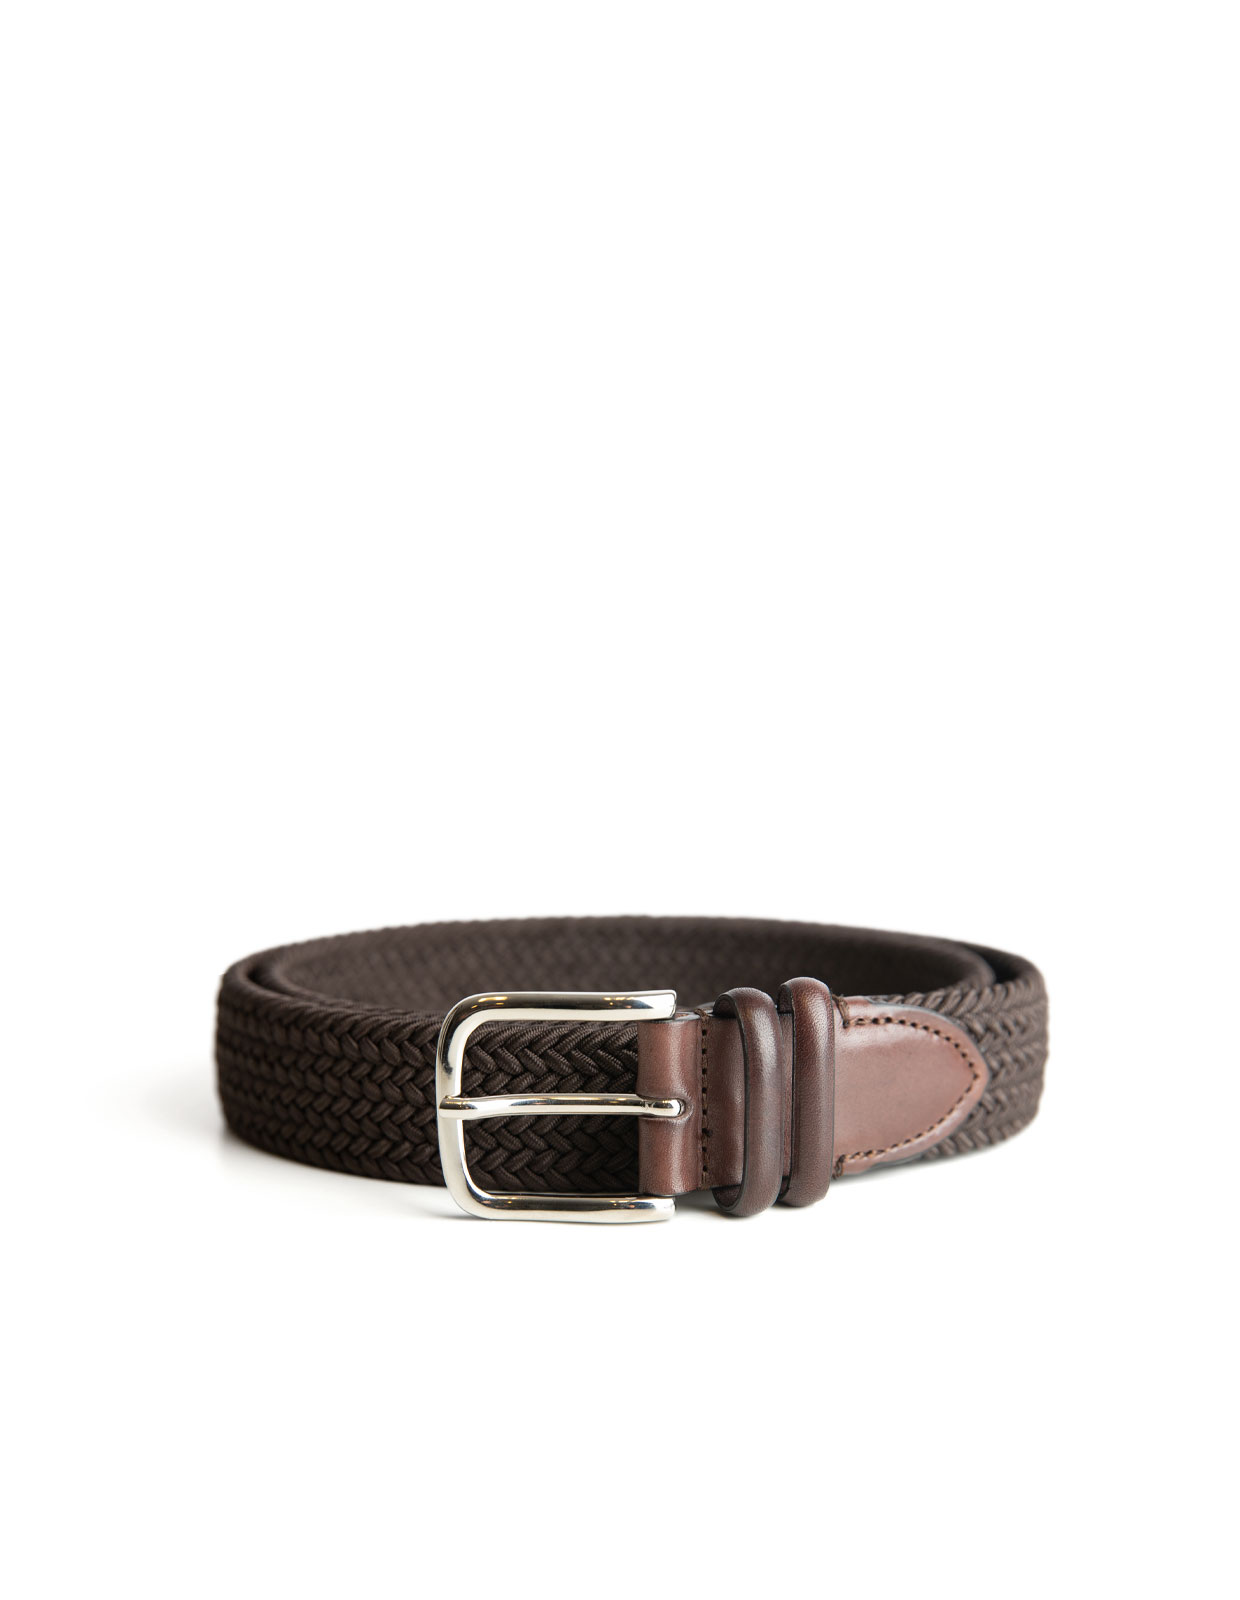 Woven Stretched Rayon Belt Dark Brown Stl 110